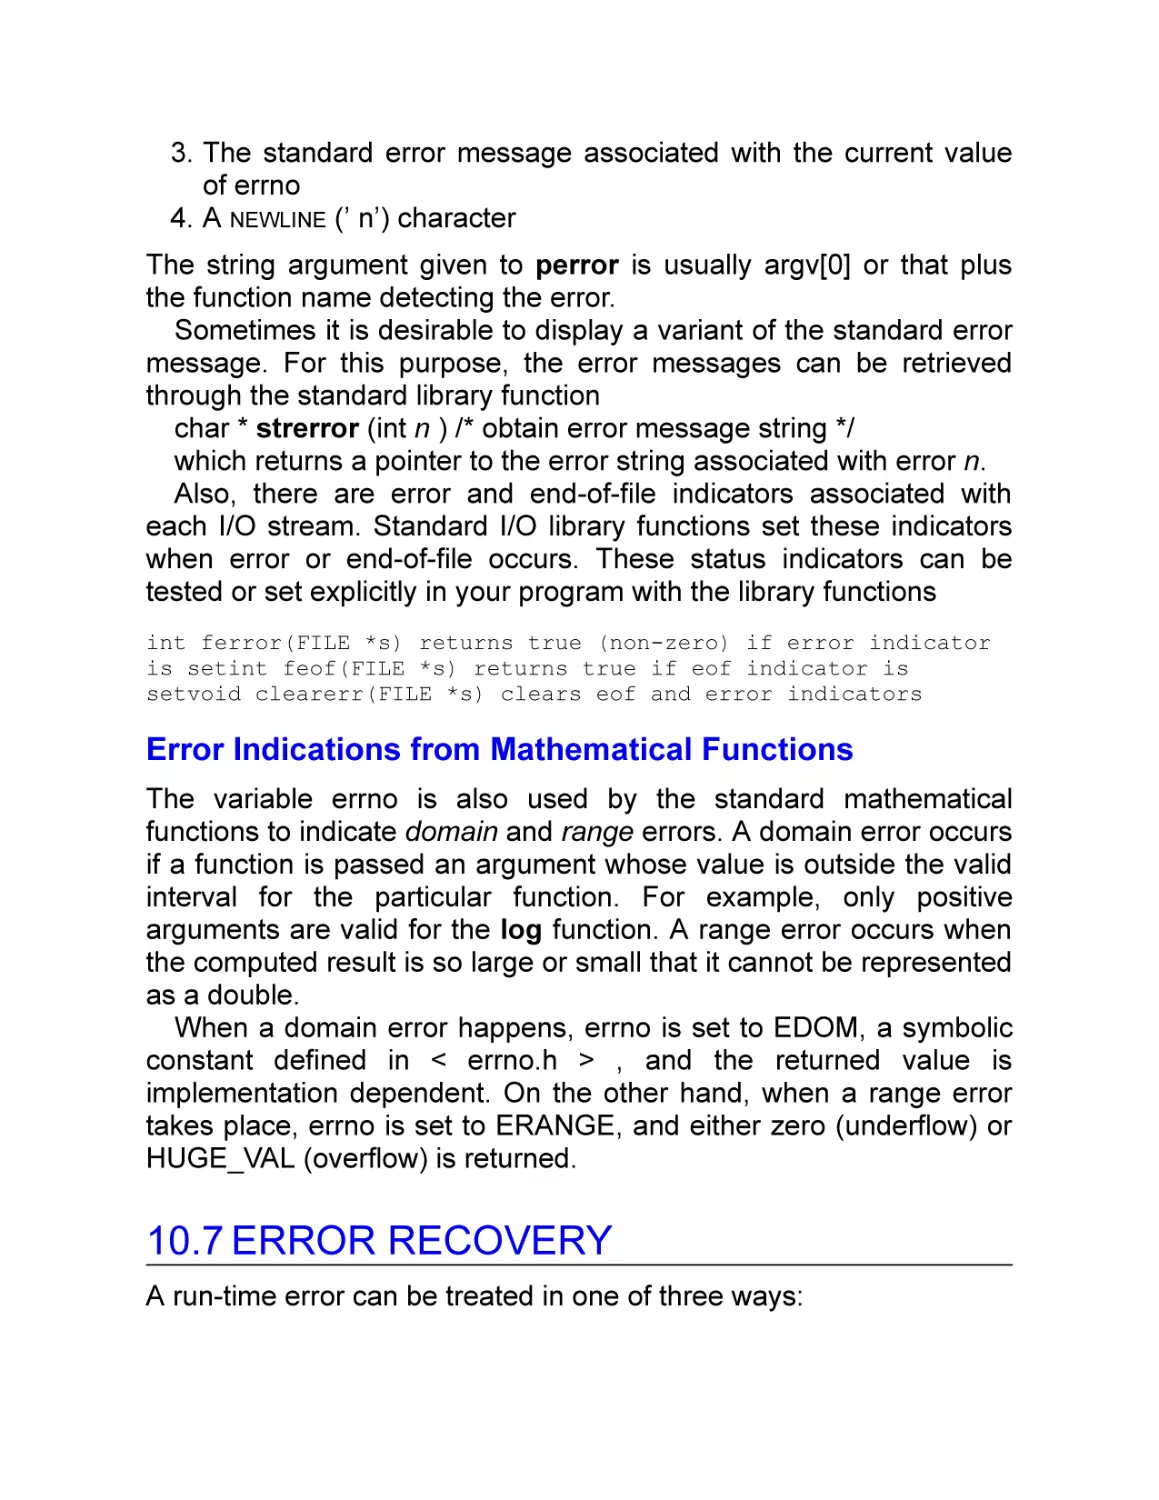 Error Indications from Mathematical Functions
10.7 Error Recovery